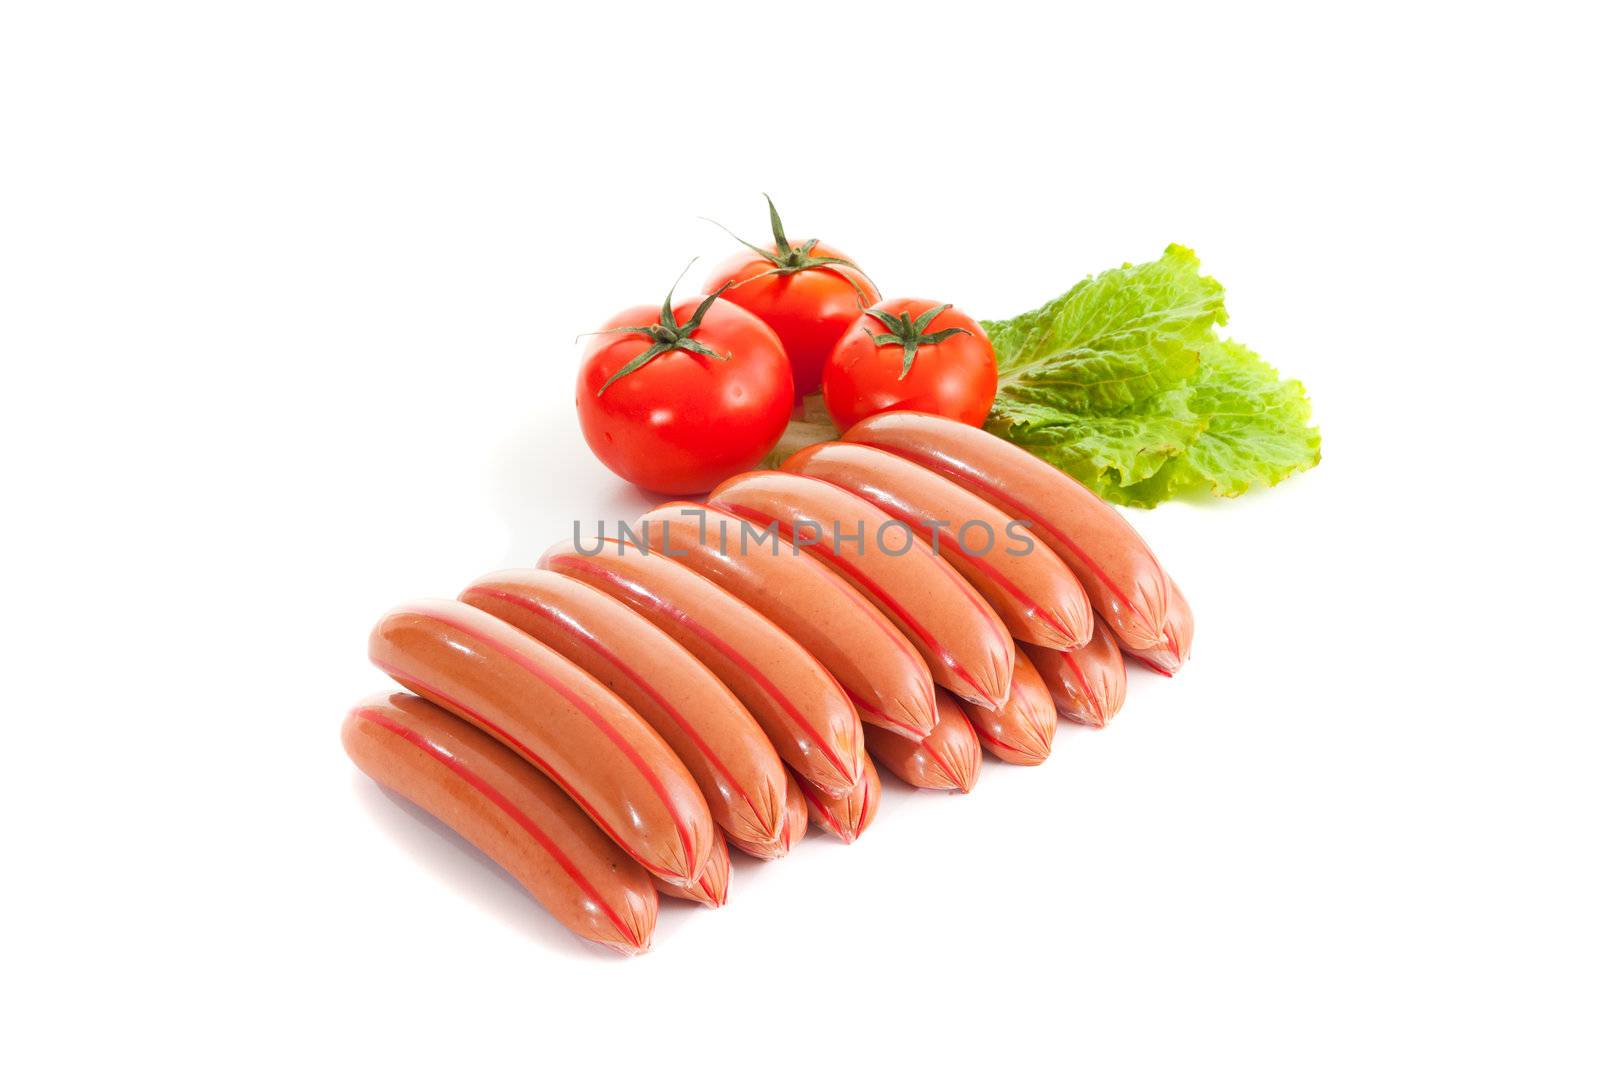 sausages with vegetables isolated on white background